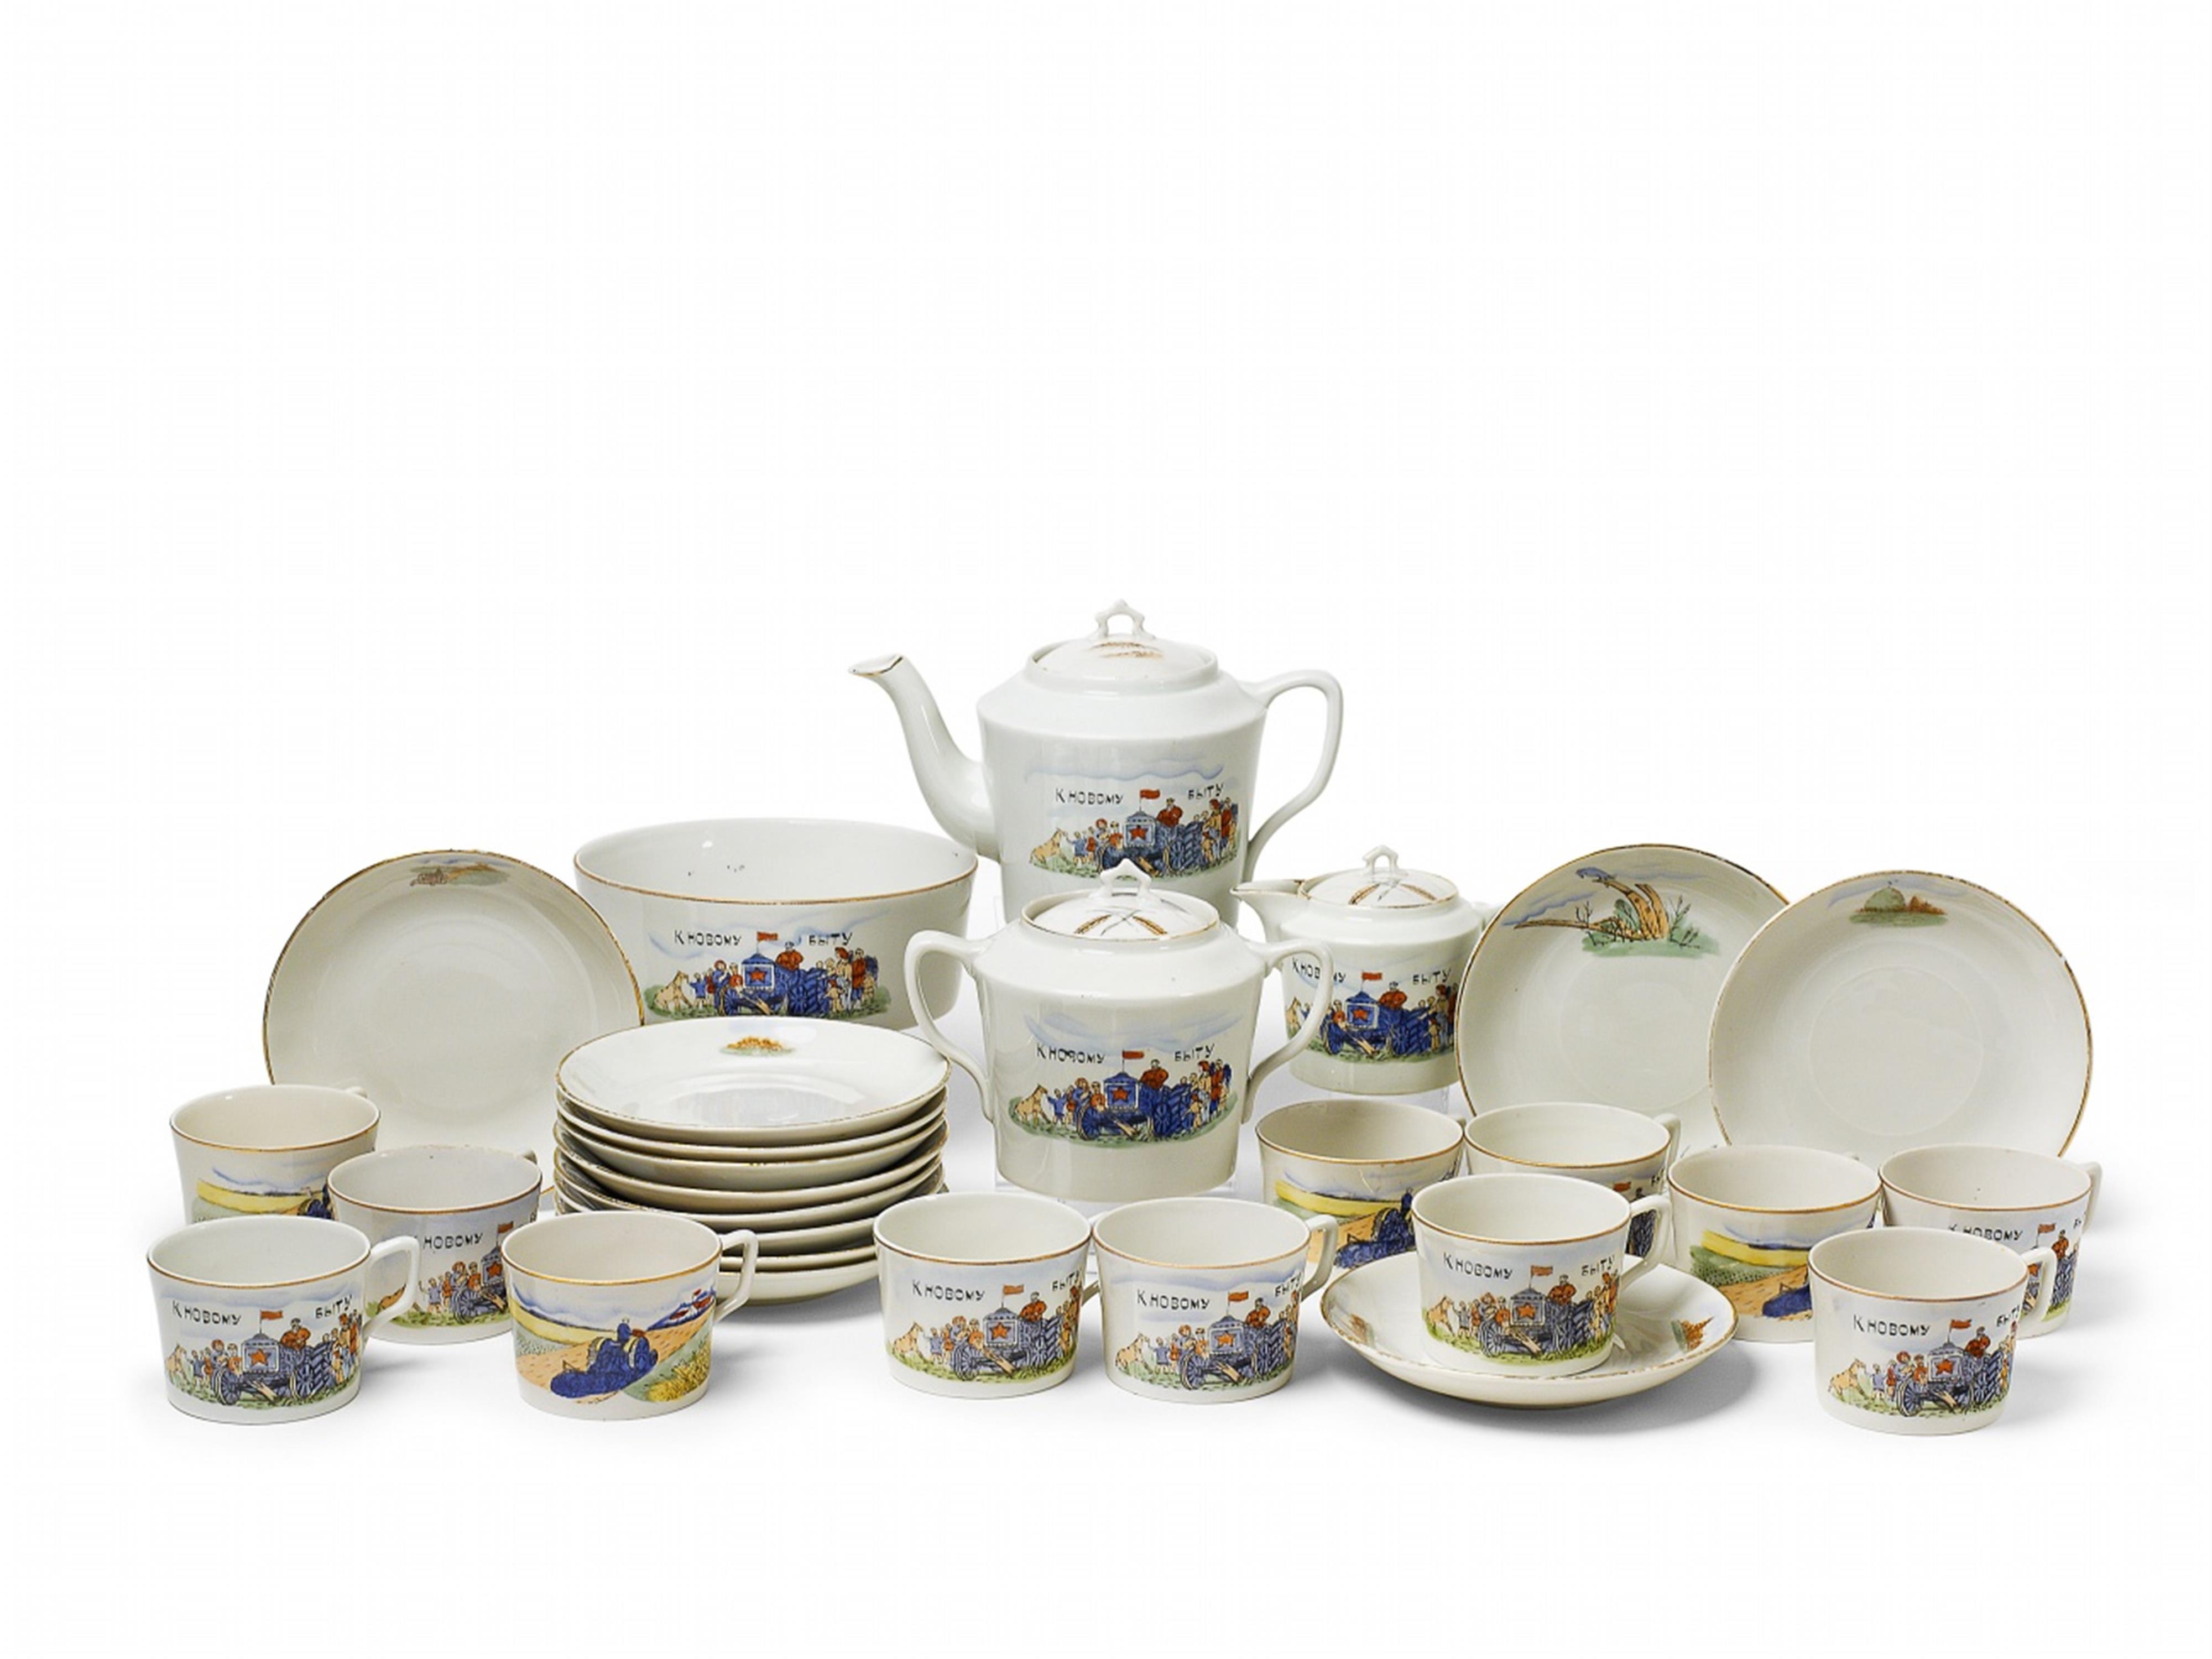 A gilt-edged porcelain tea service printed with motifs from Kolkhoz farms, gilt and inscribed "To new customs!" - image-1